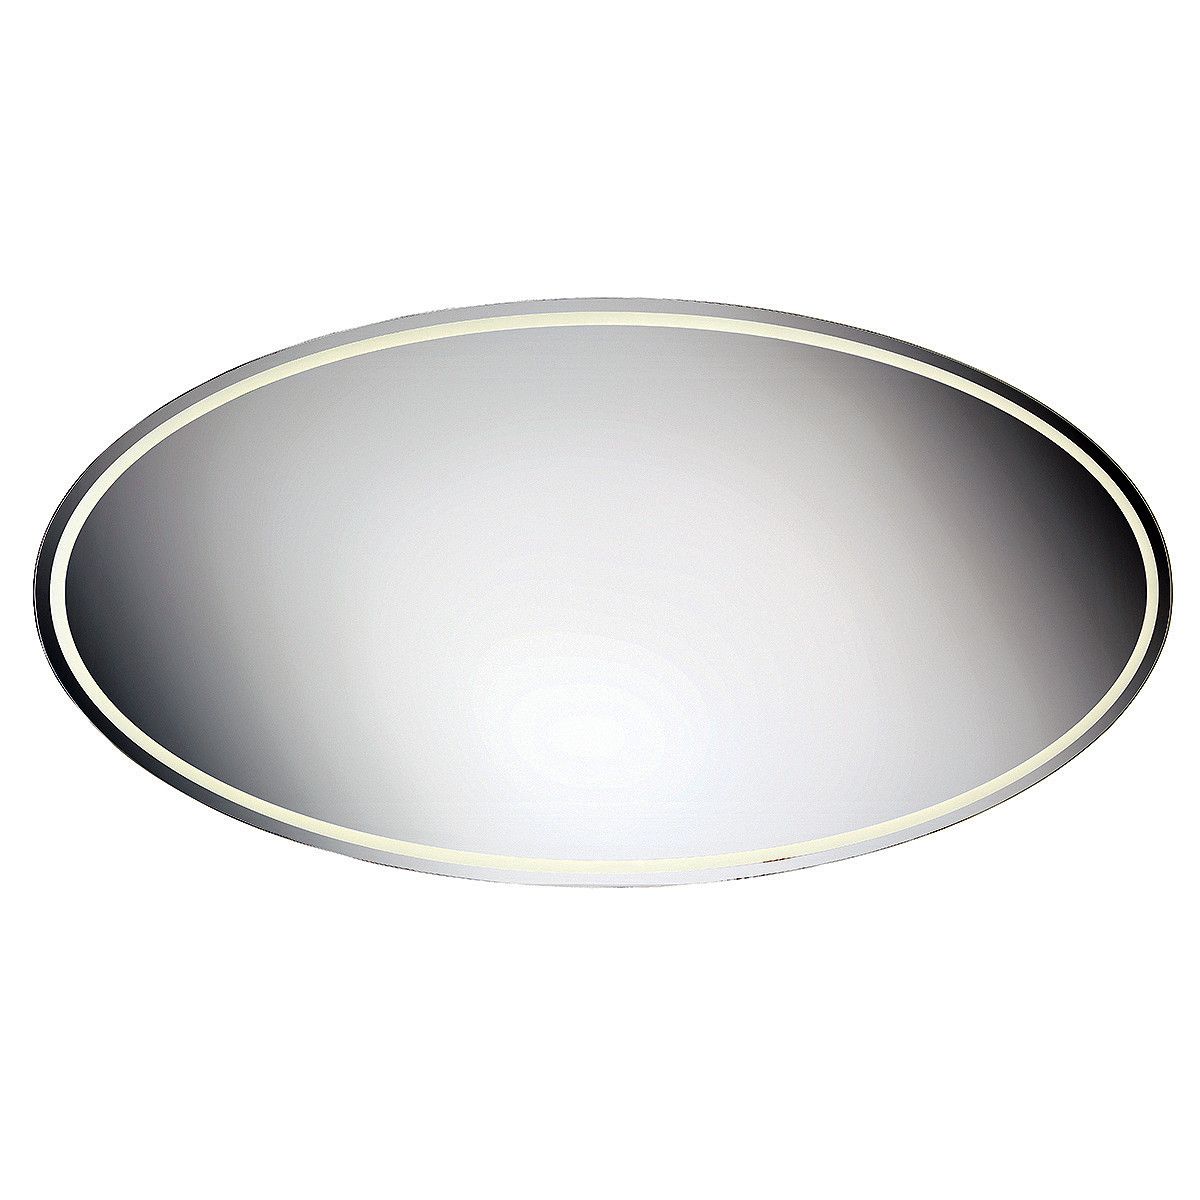 Eurofase Lighting 29106 Mirror Oval Shaped Flat 1 Light Led Mirror Throughout Edge Lit Oval Led Wall Mirrors (View 15 of 15)